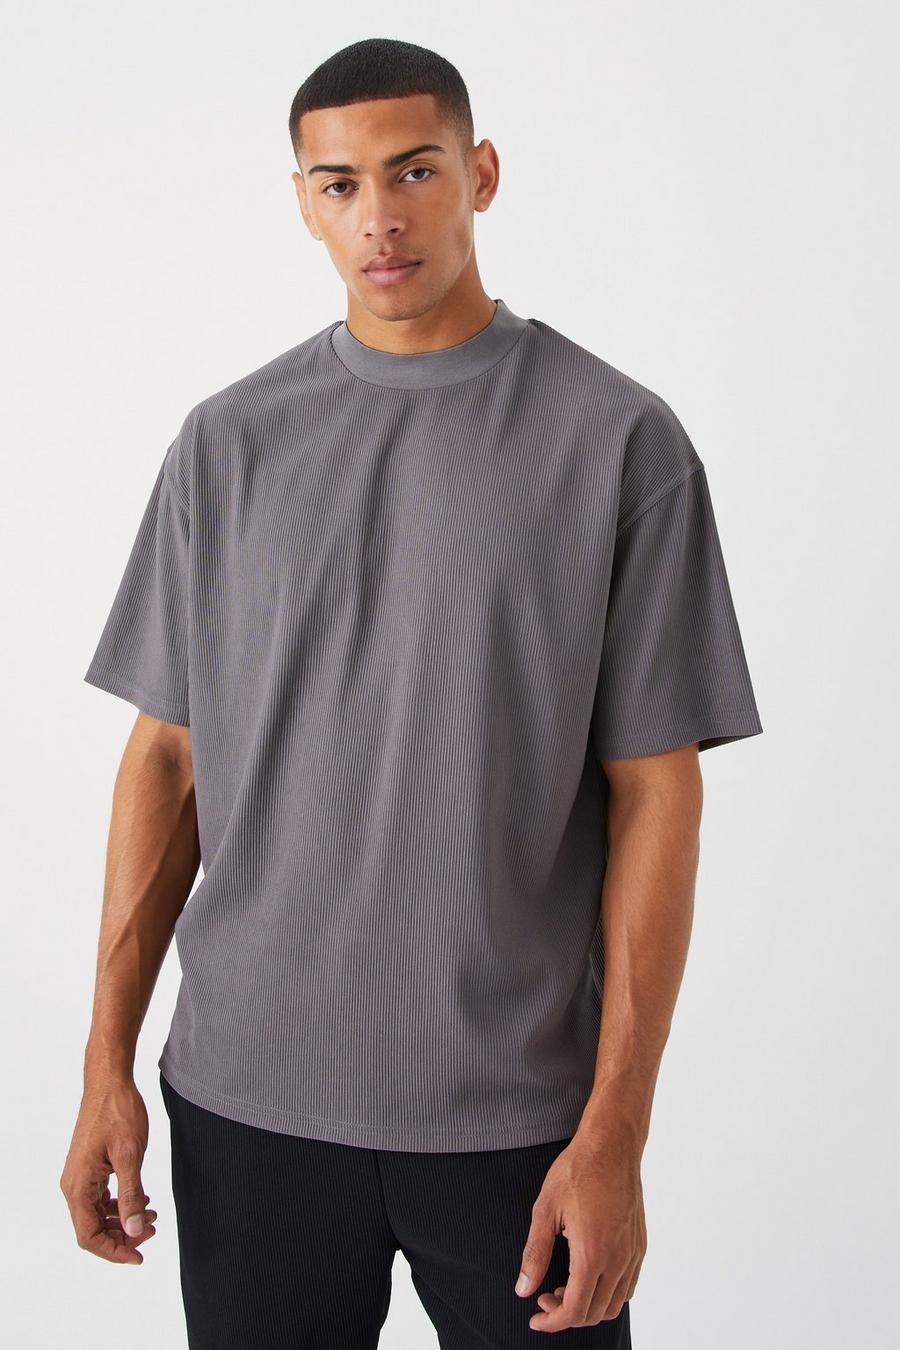 Charcoal grey Oversized Extended Neck Ottoman Rib T-shirt